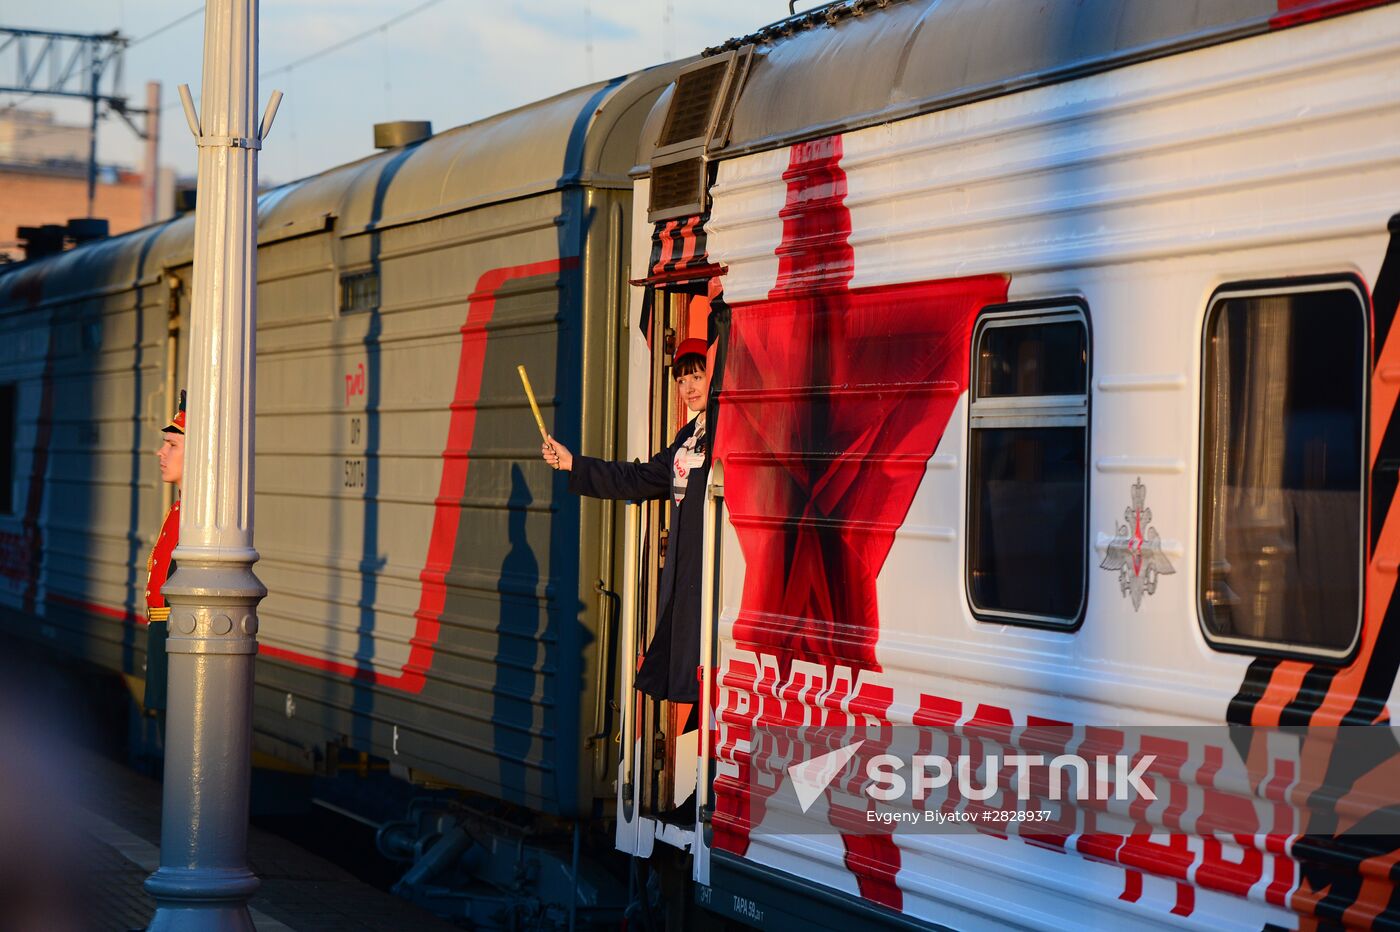 Agitprop train "The Army of Victory" sets off from Belorussky rail terminal